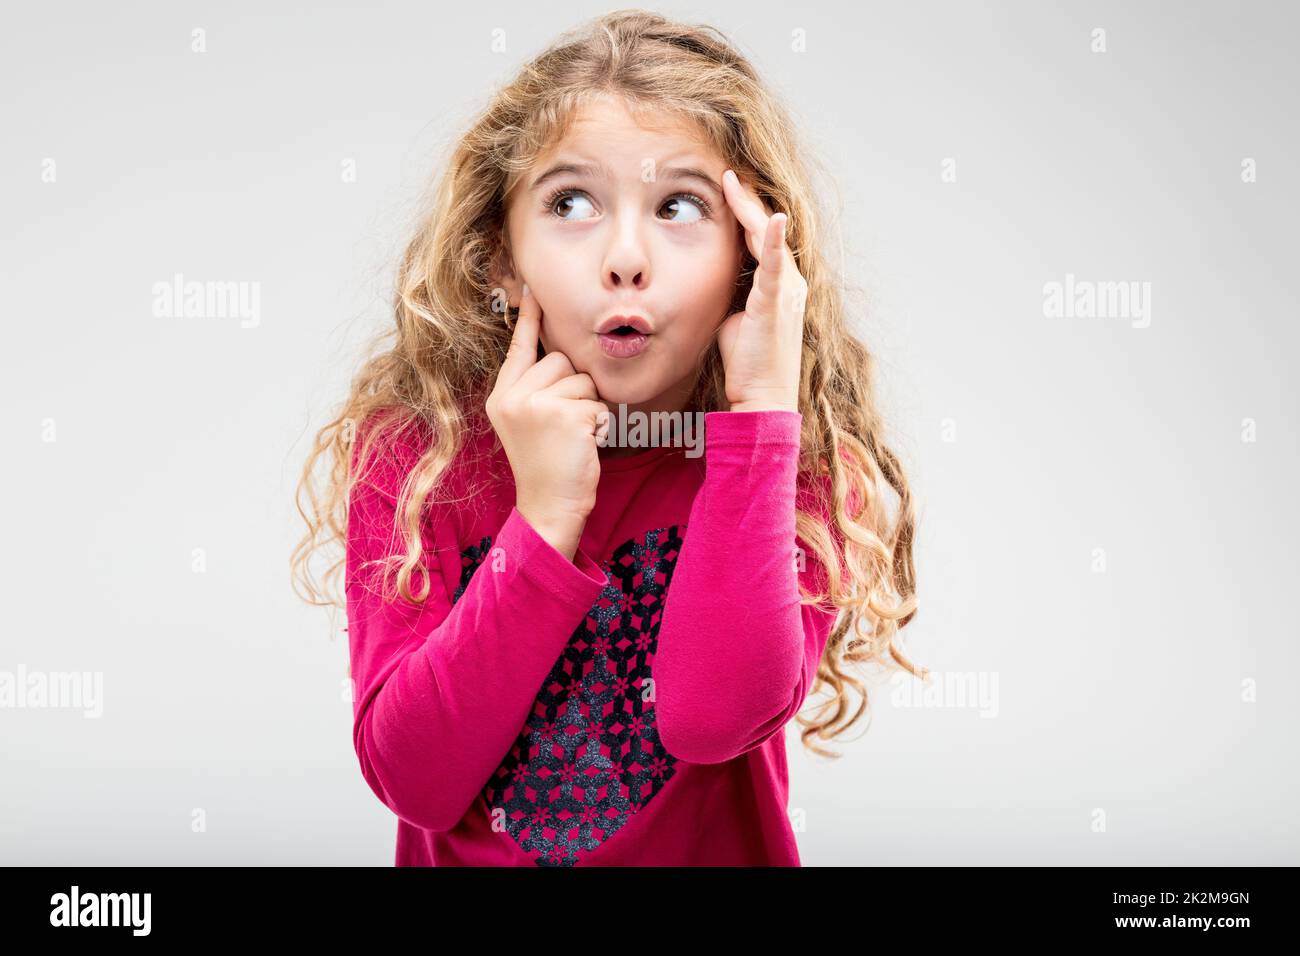 Fun playful little girl with a teasing expression Stock Photo